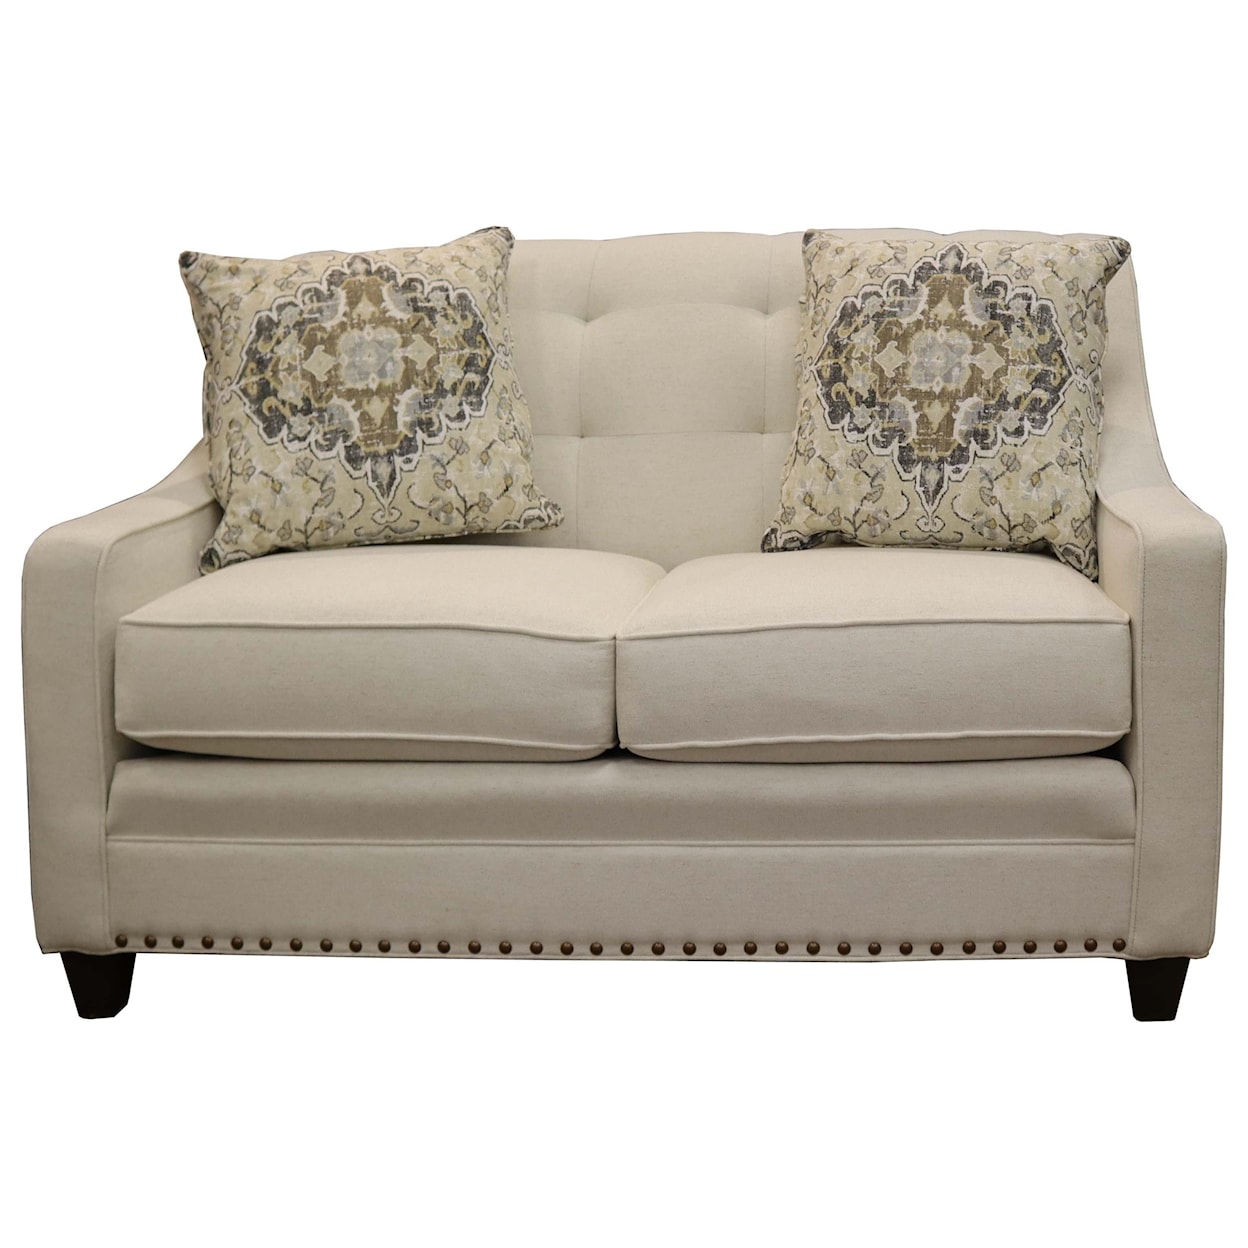 Smith Brothers 203 Transitional Loveseat